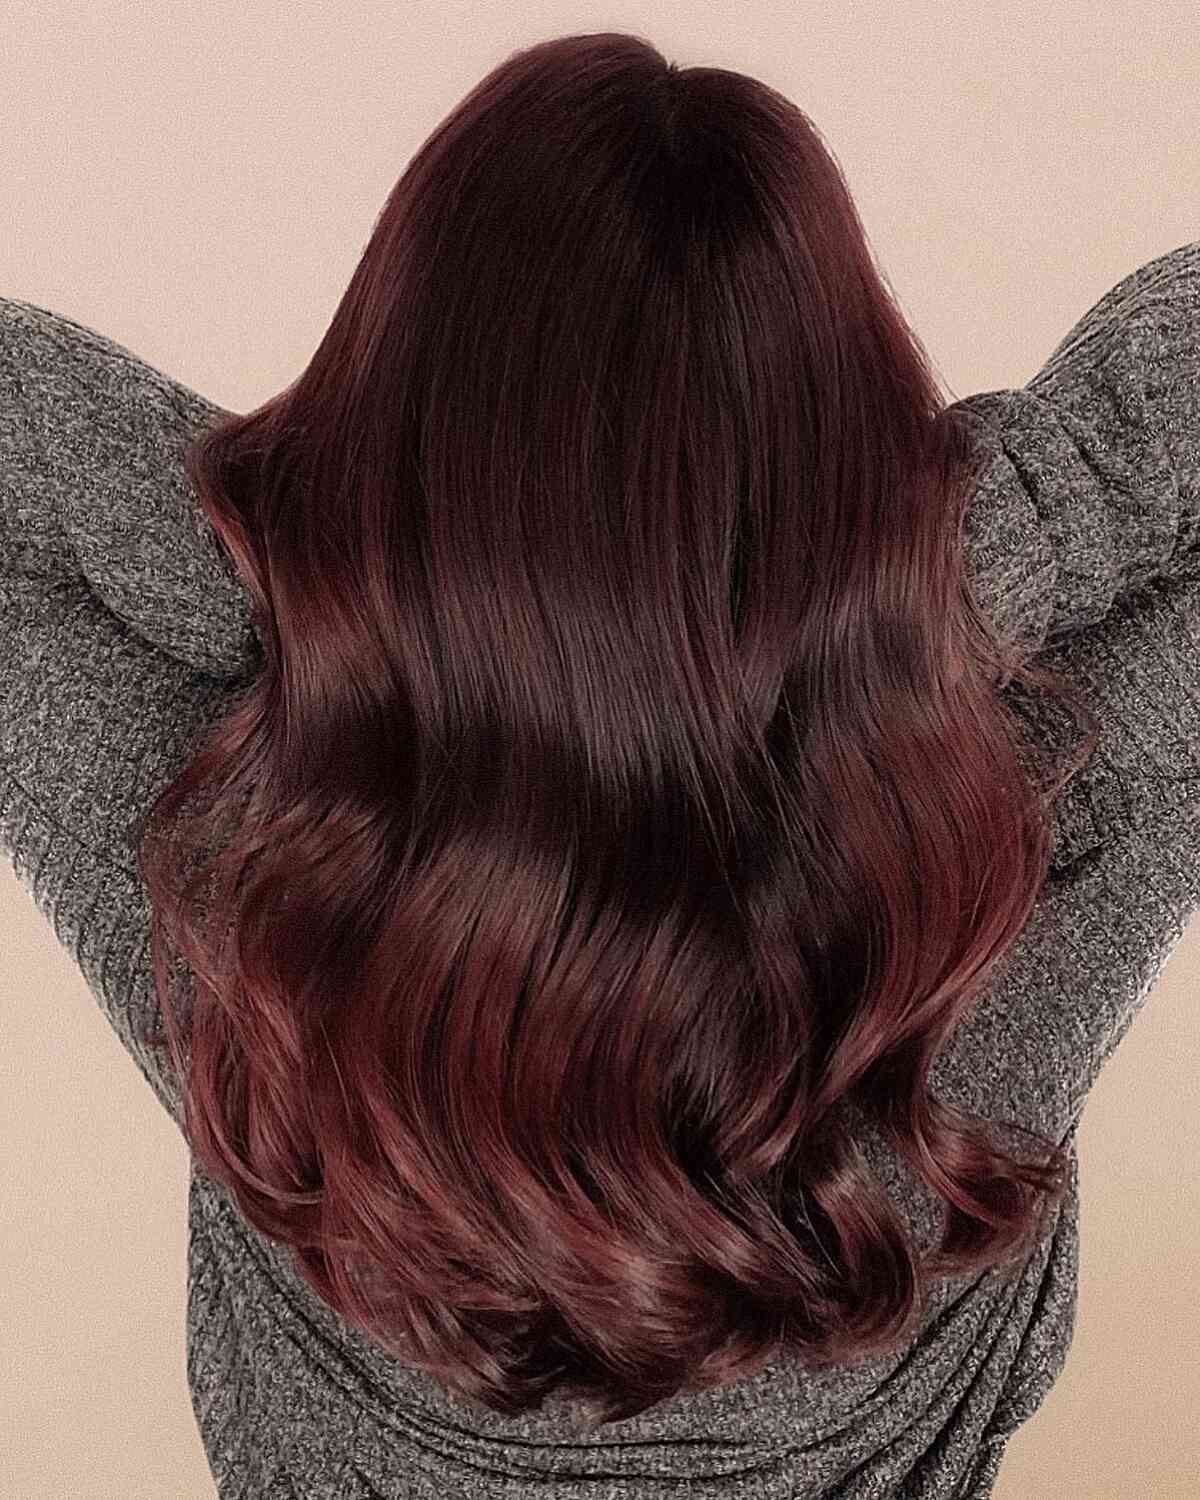 Natural Dark Cherry Cola Color for Long Hair